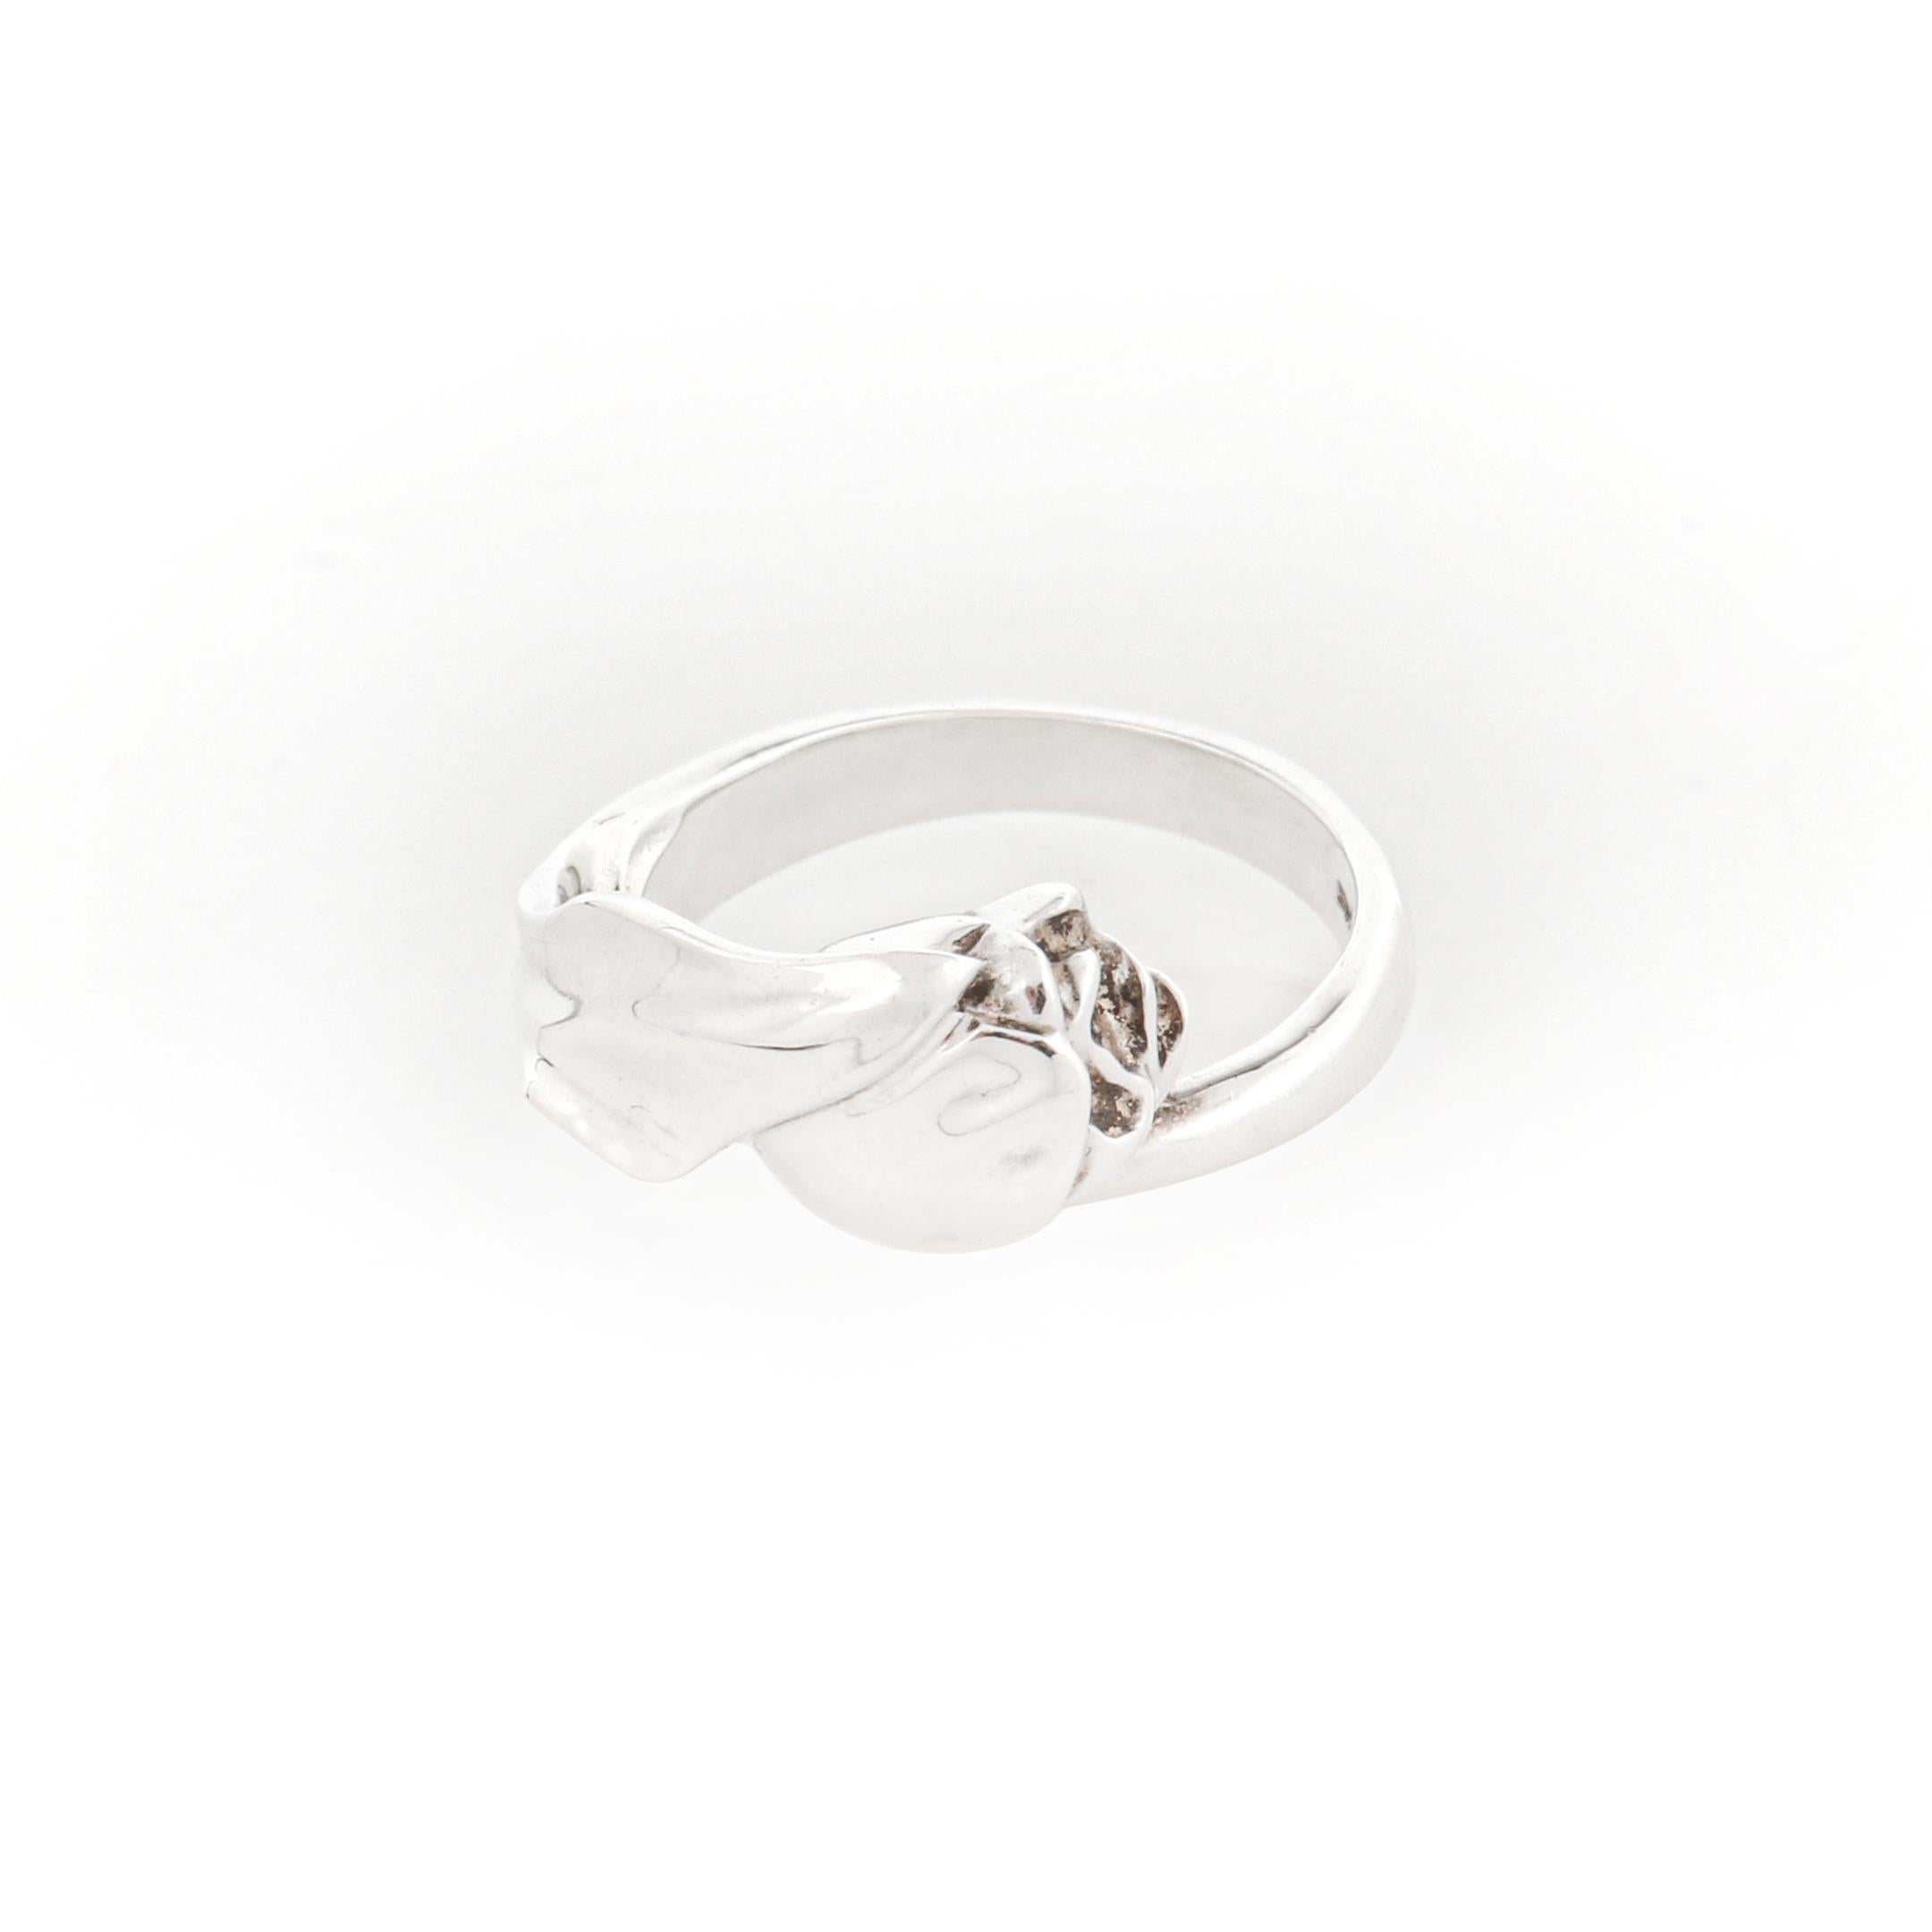 TIFFANY & CO c. 1984 Sterling Silver Wrapped Tulip Flower Motif Sculpted Ring

Brand / Manufacturer: Tiffany & Co
Circa: 1984-1985
Style: Ring
Color(s): Silver
Marked Material: “925” Sterling Silver
Additional Details / Inclusions: Tiffany & Co